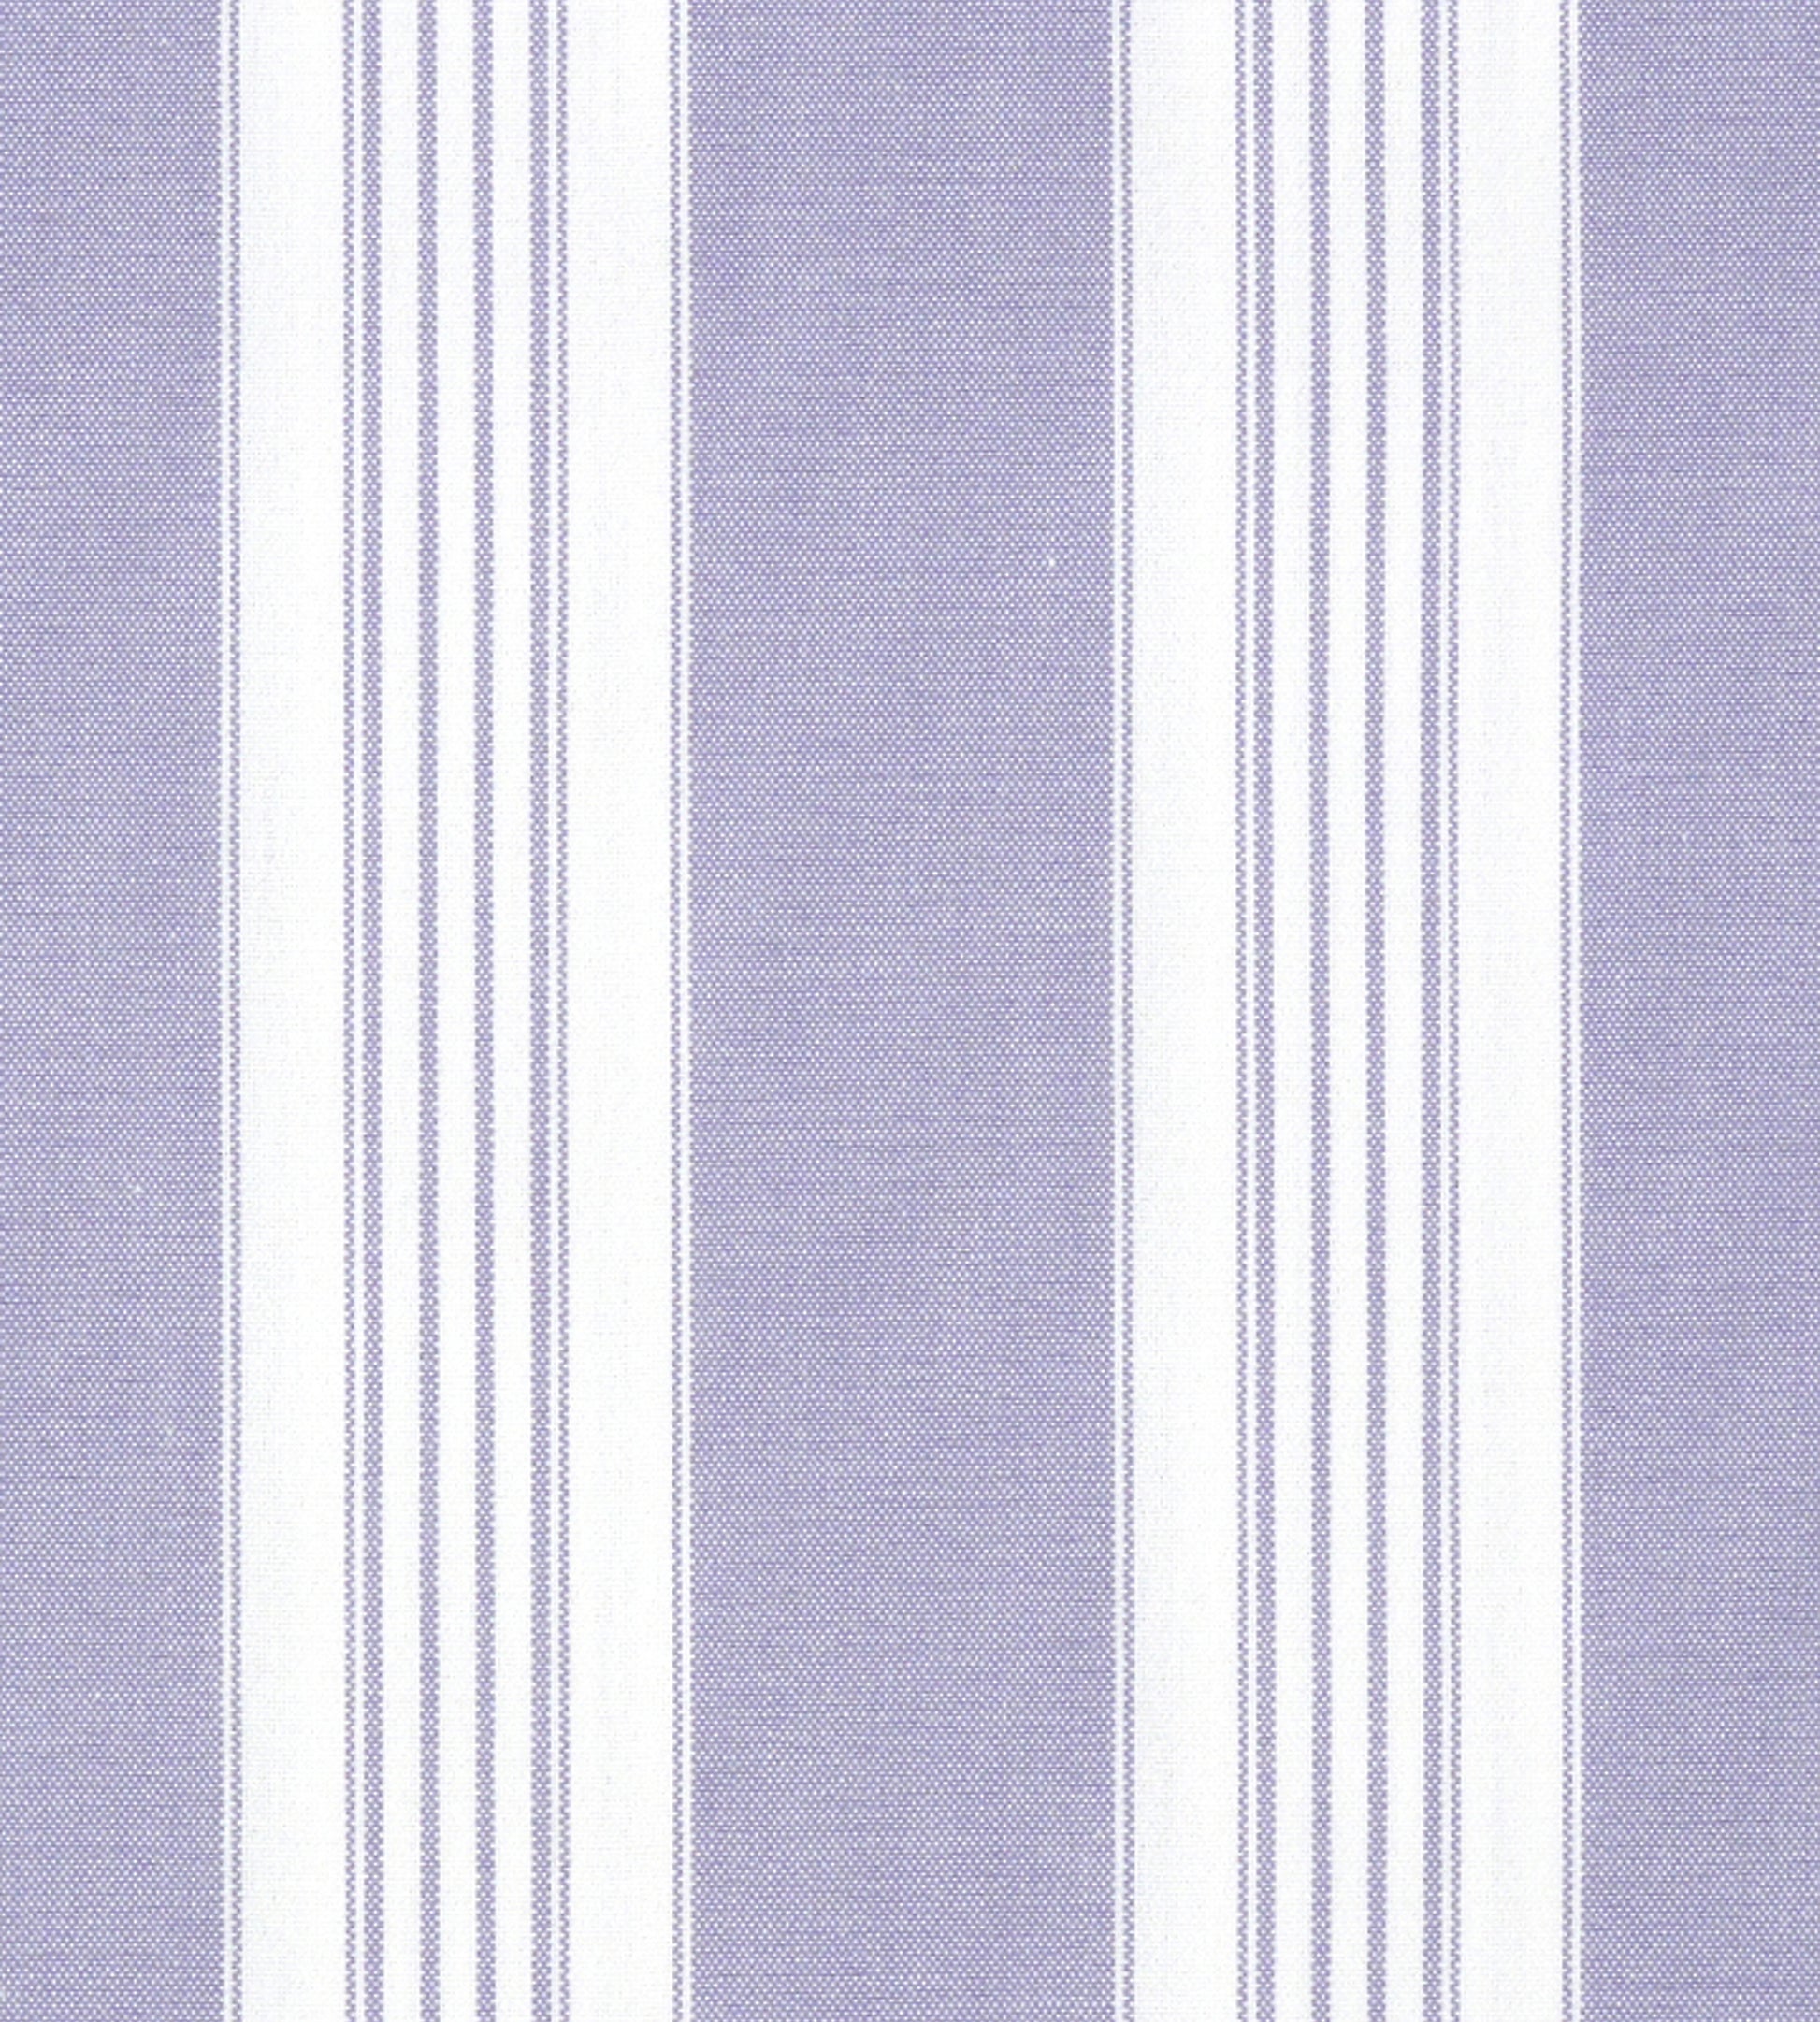 Purchase Old World Weavers Fabric Product# F3 00083021, Poker Wide Stripe Lavender 1